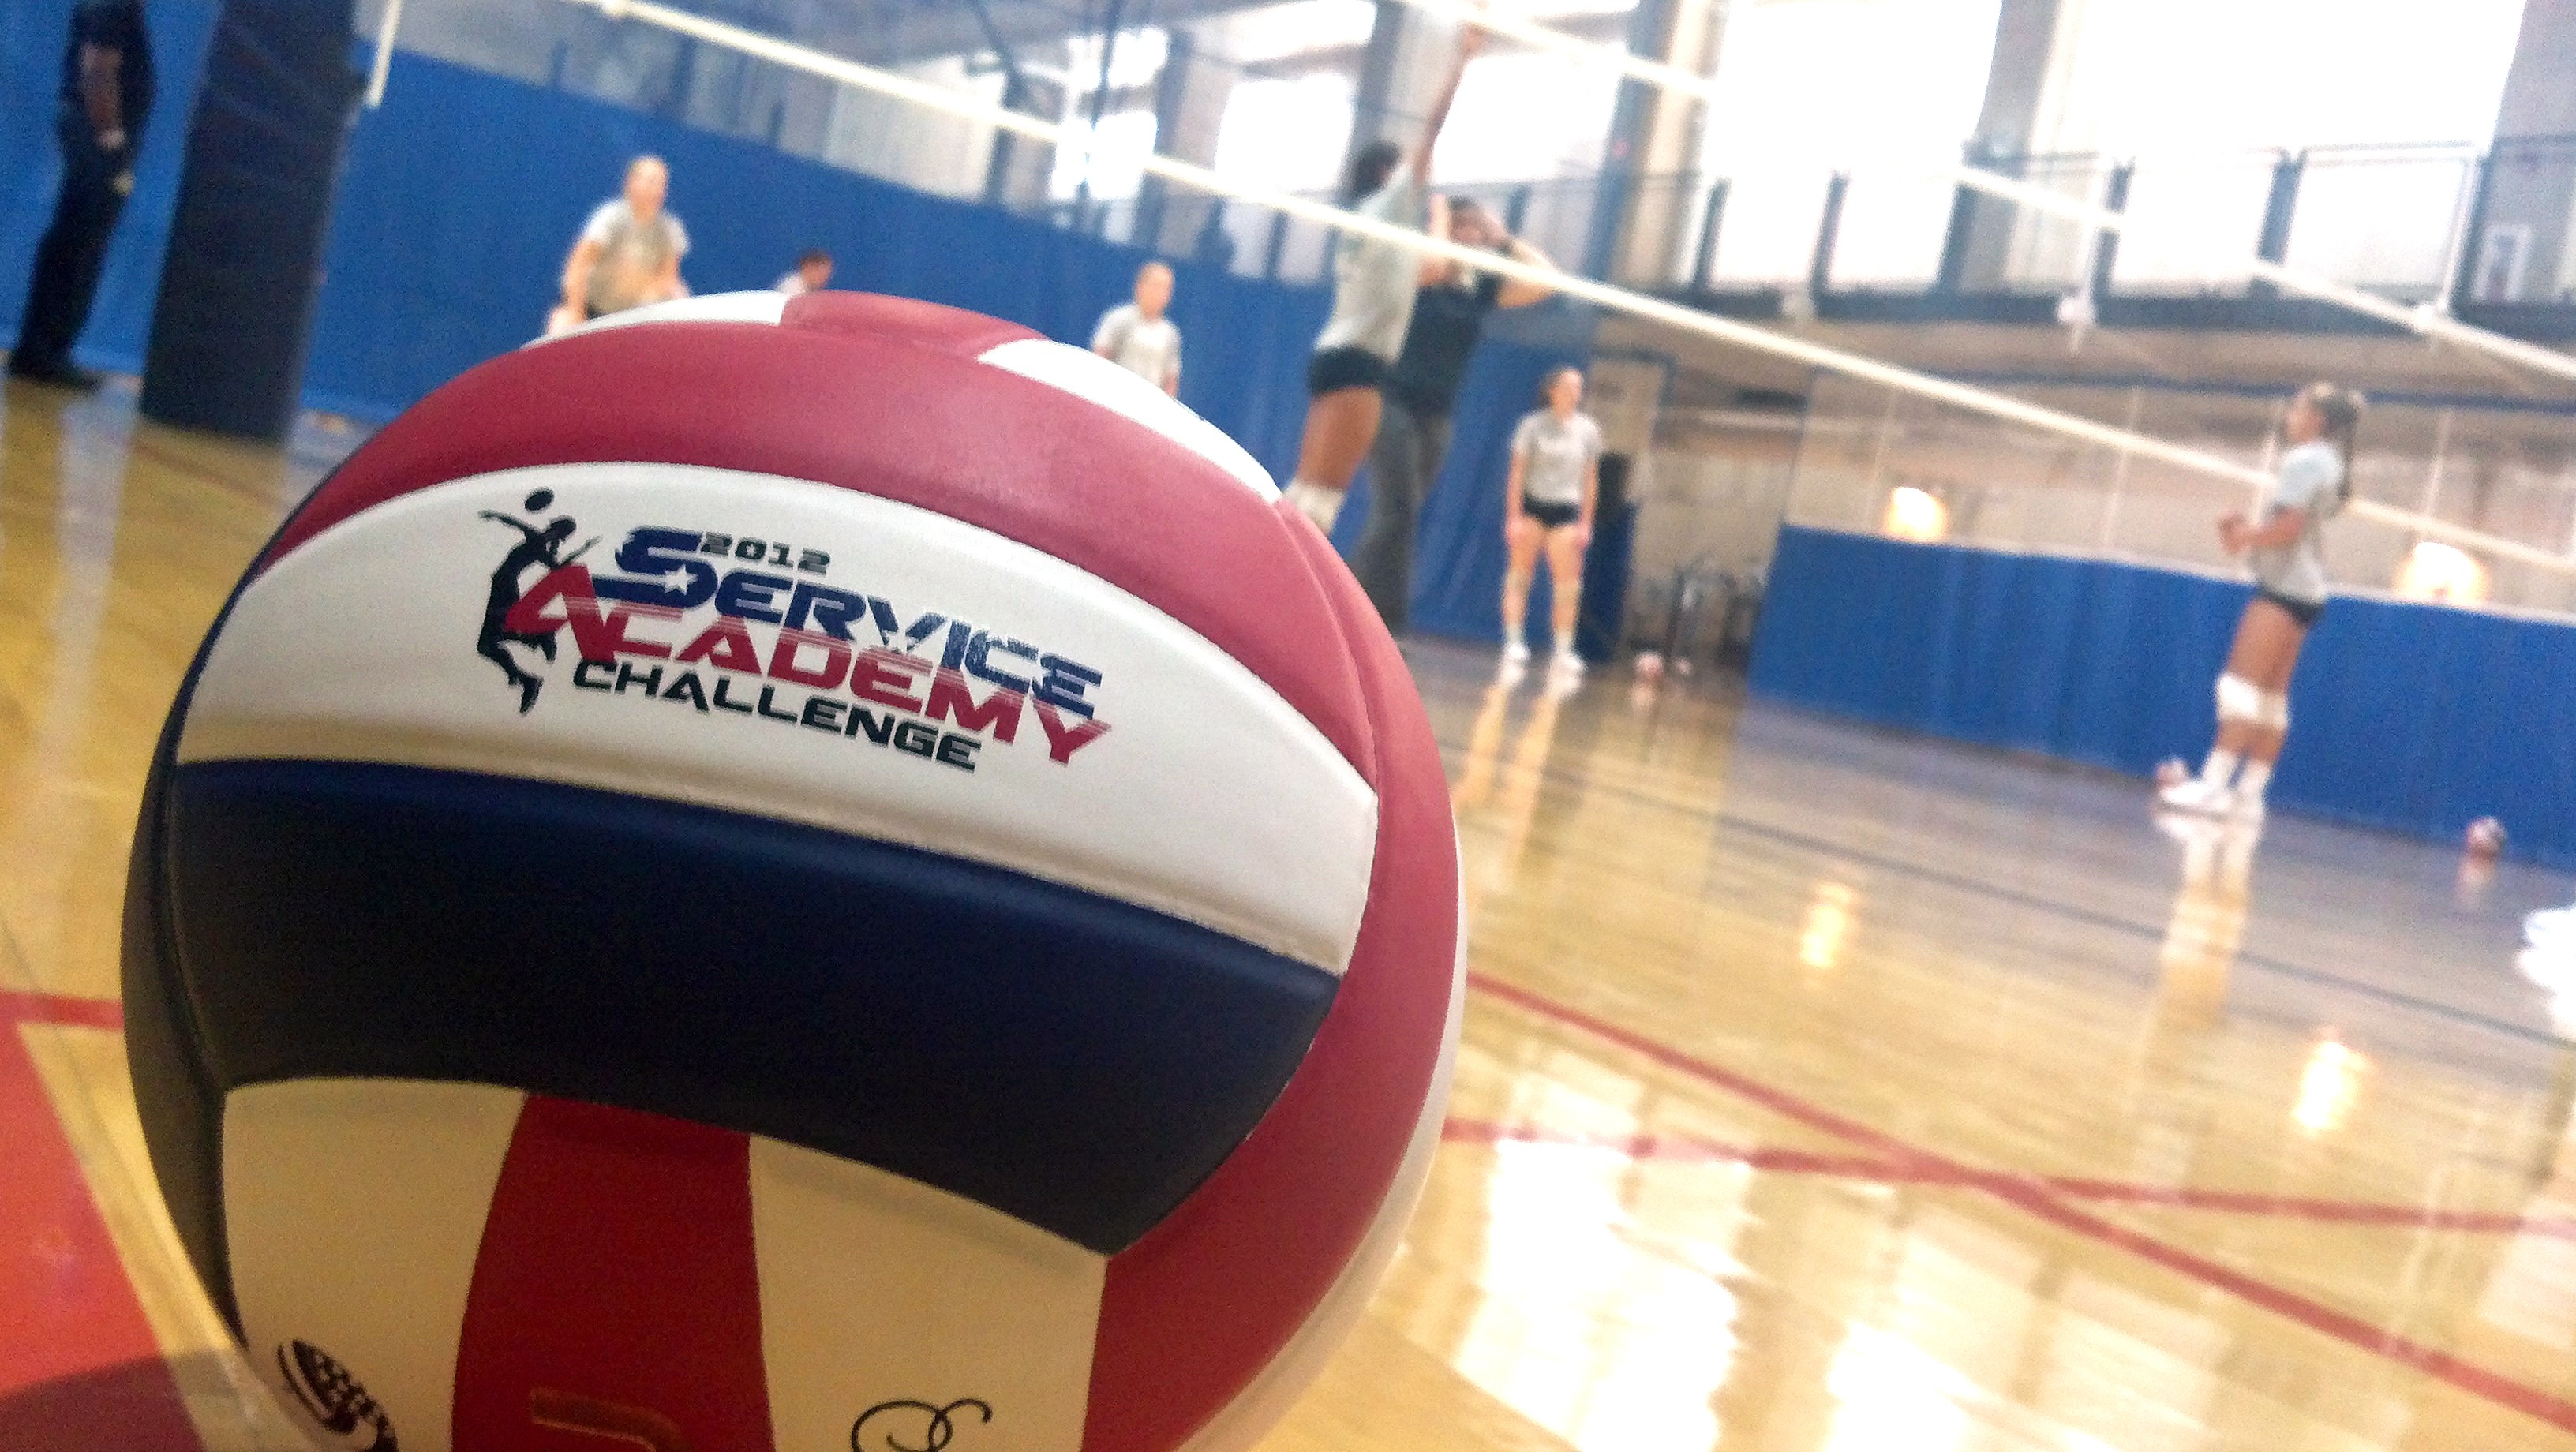 Academy women's volleyball teams compete at Pentagon Article The